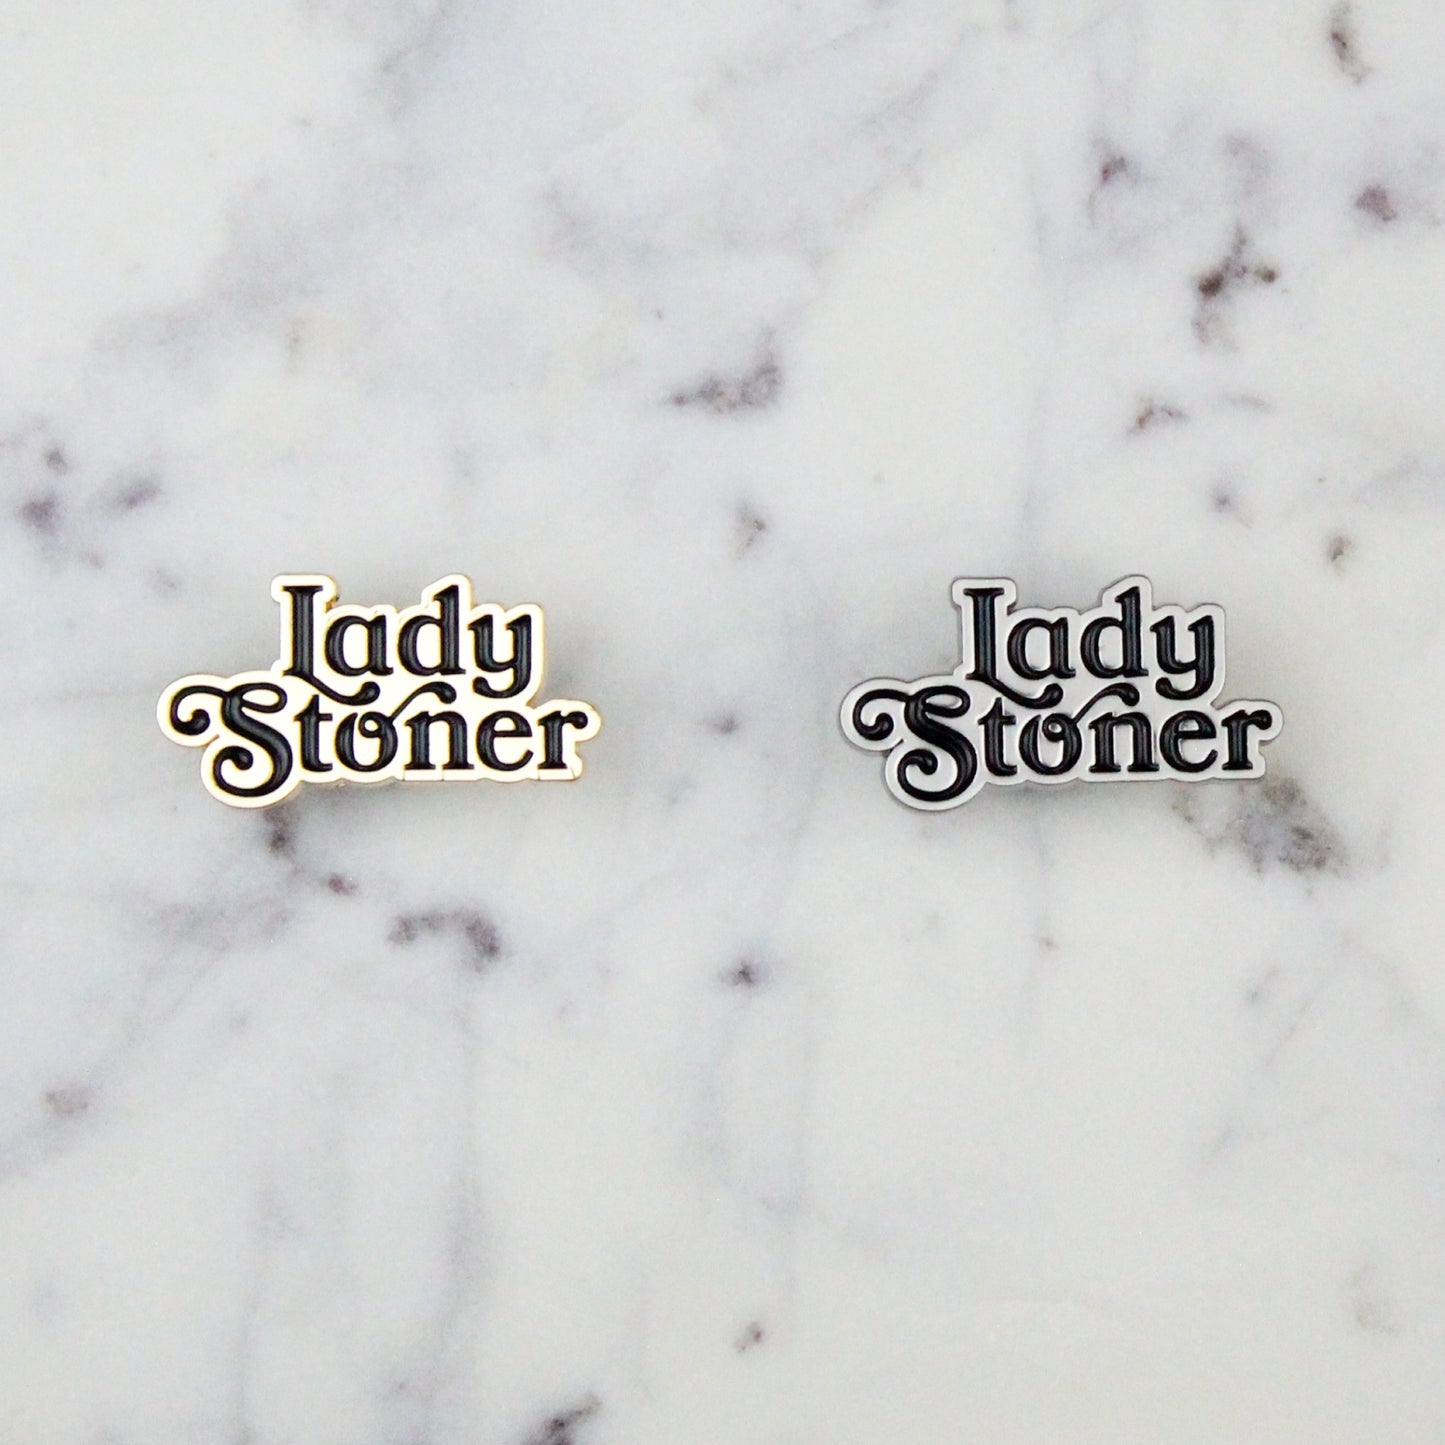 gold and silver lady stoner enamel pins side by side